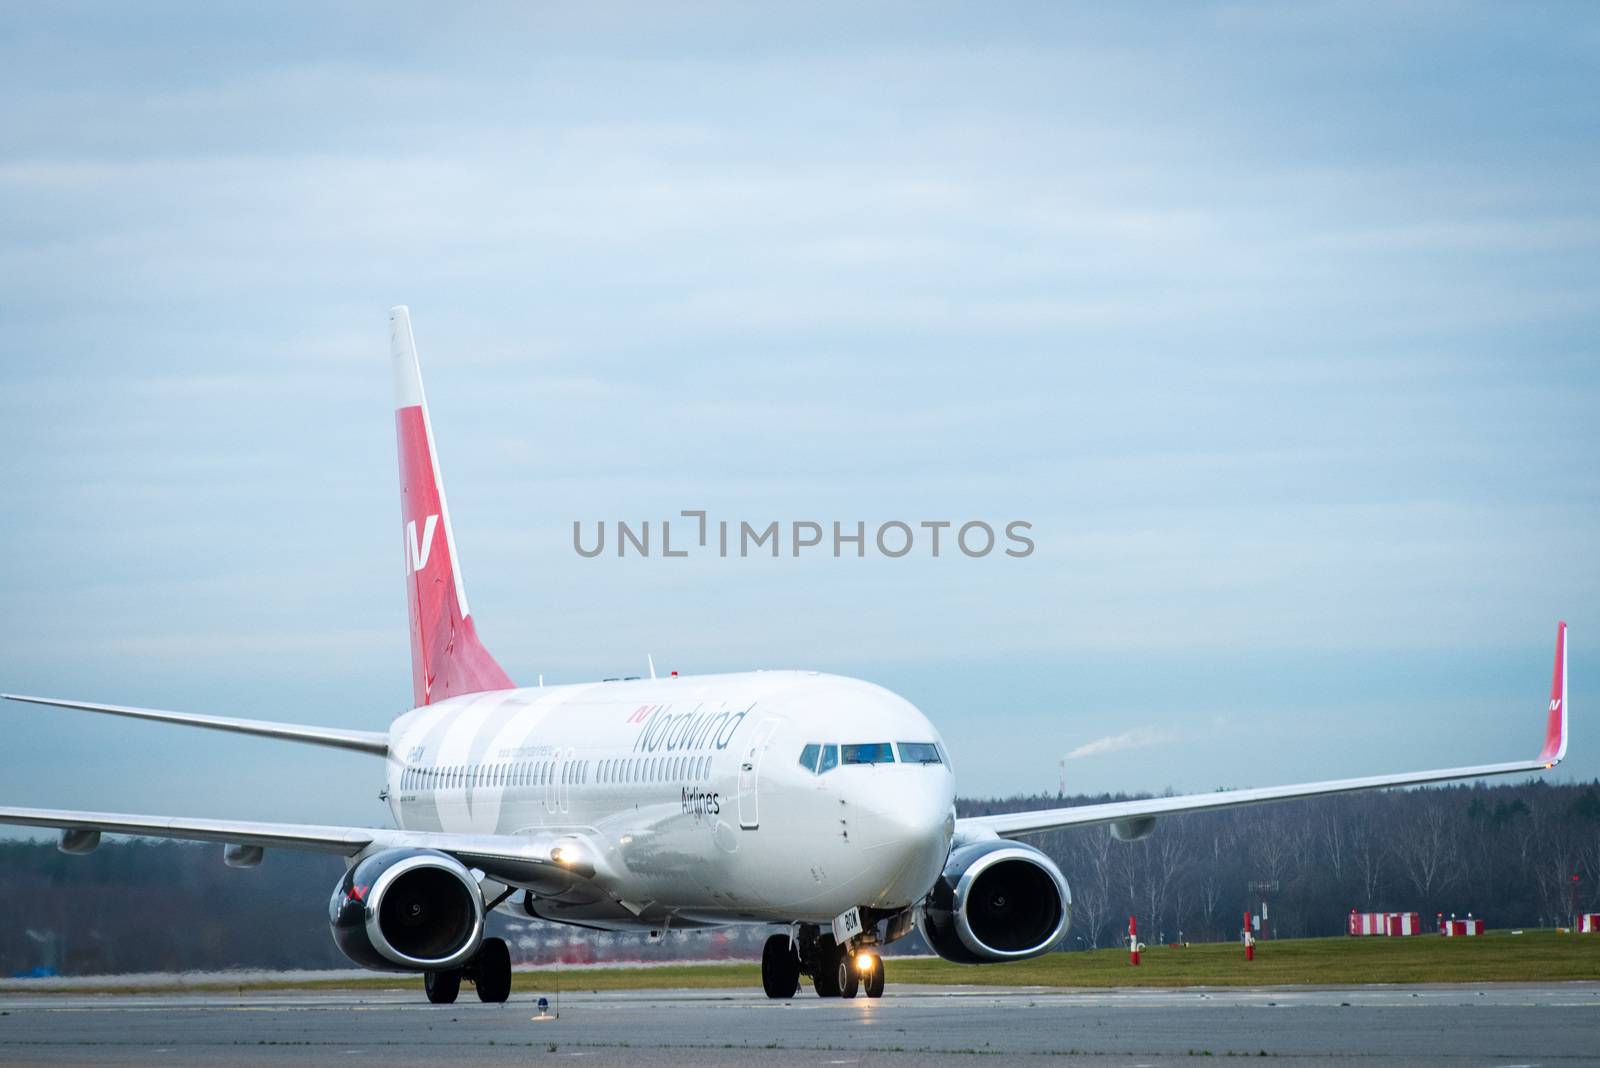 October 29, 2019, Moscow, Russia. Plane 
Boeing 737-800 Nordwind Airlines at Sheremetyevo airport in Moscow.